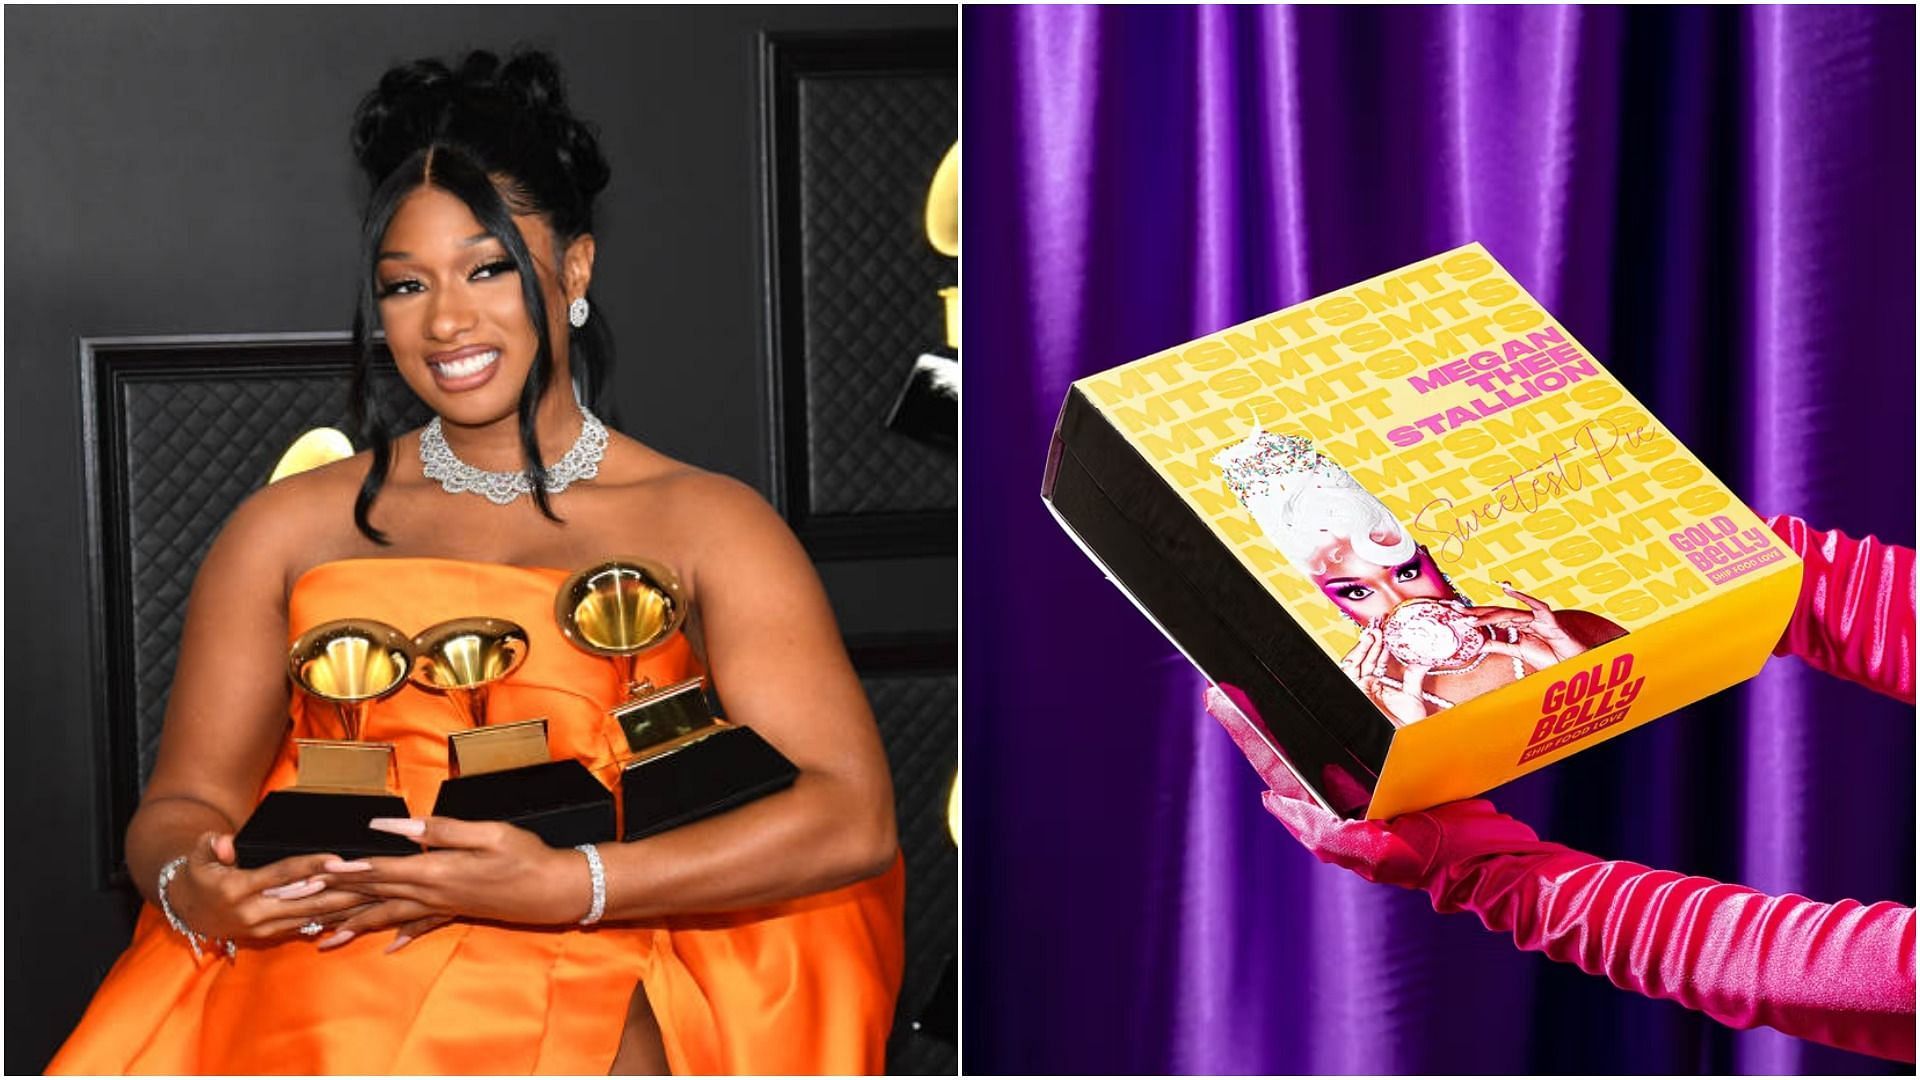 Megan Thee Stallion&#039;s new H-Town Hottie Pie is the sweetest pie in town (Image Credit: Getty Images and Goldbelly)